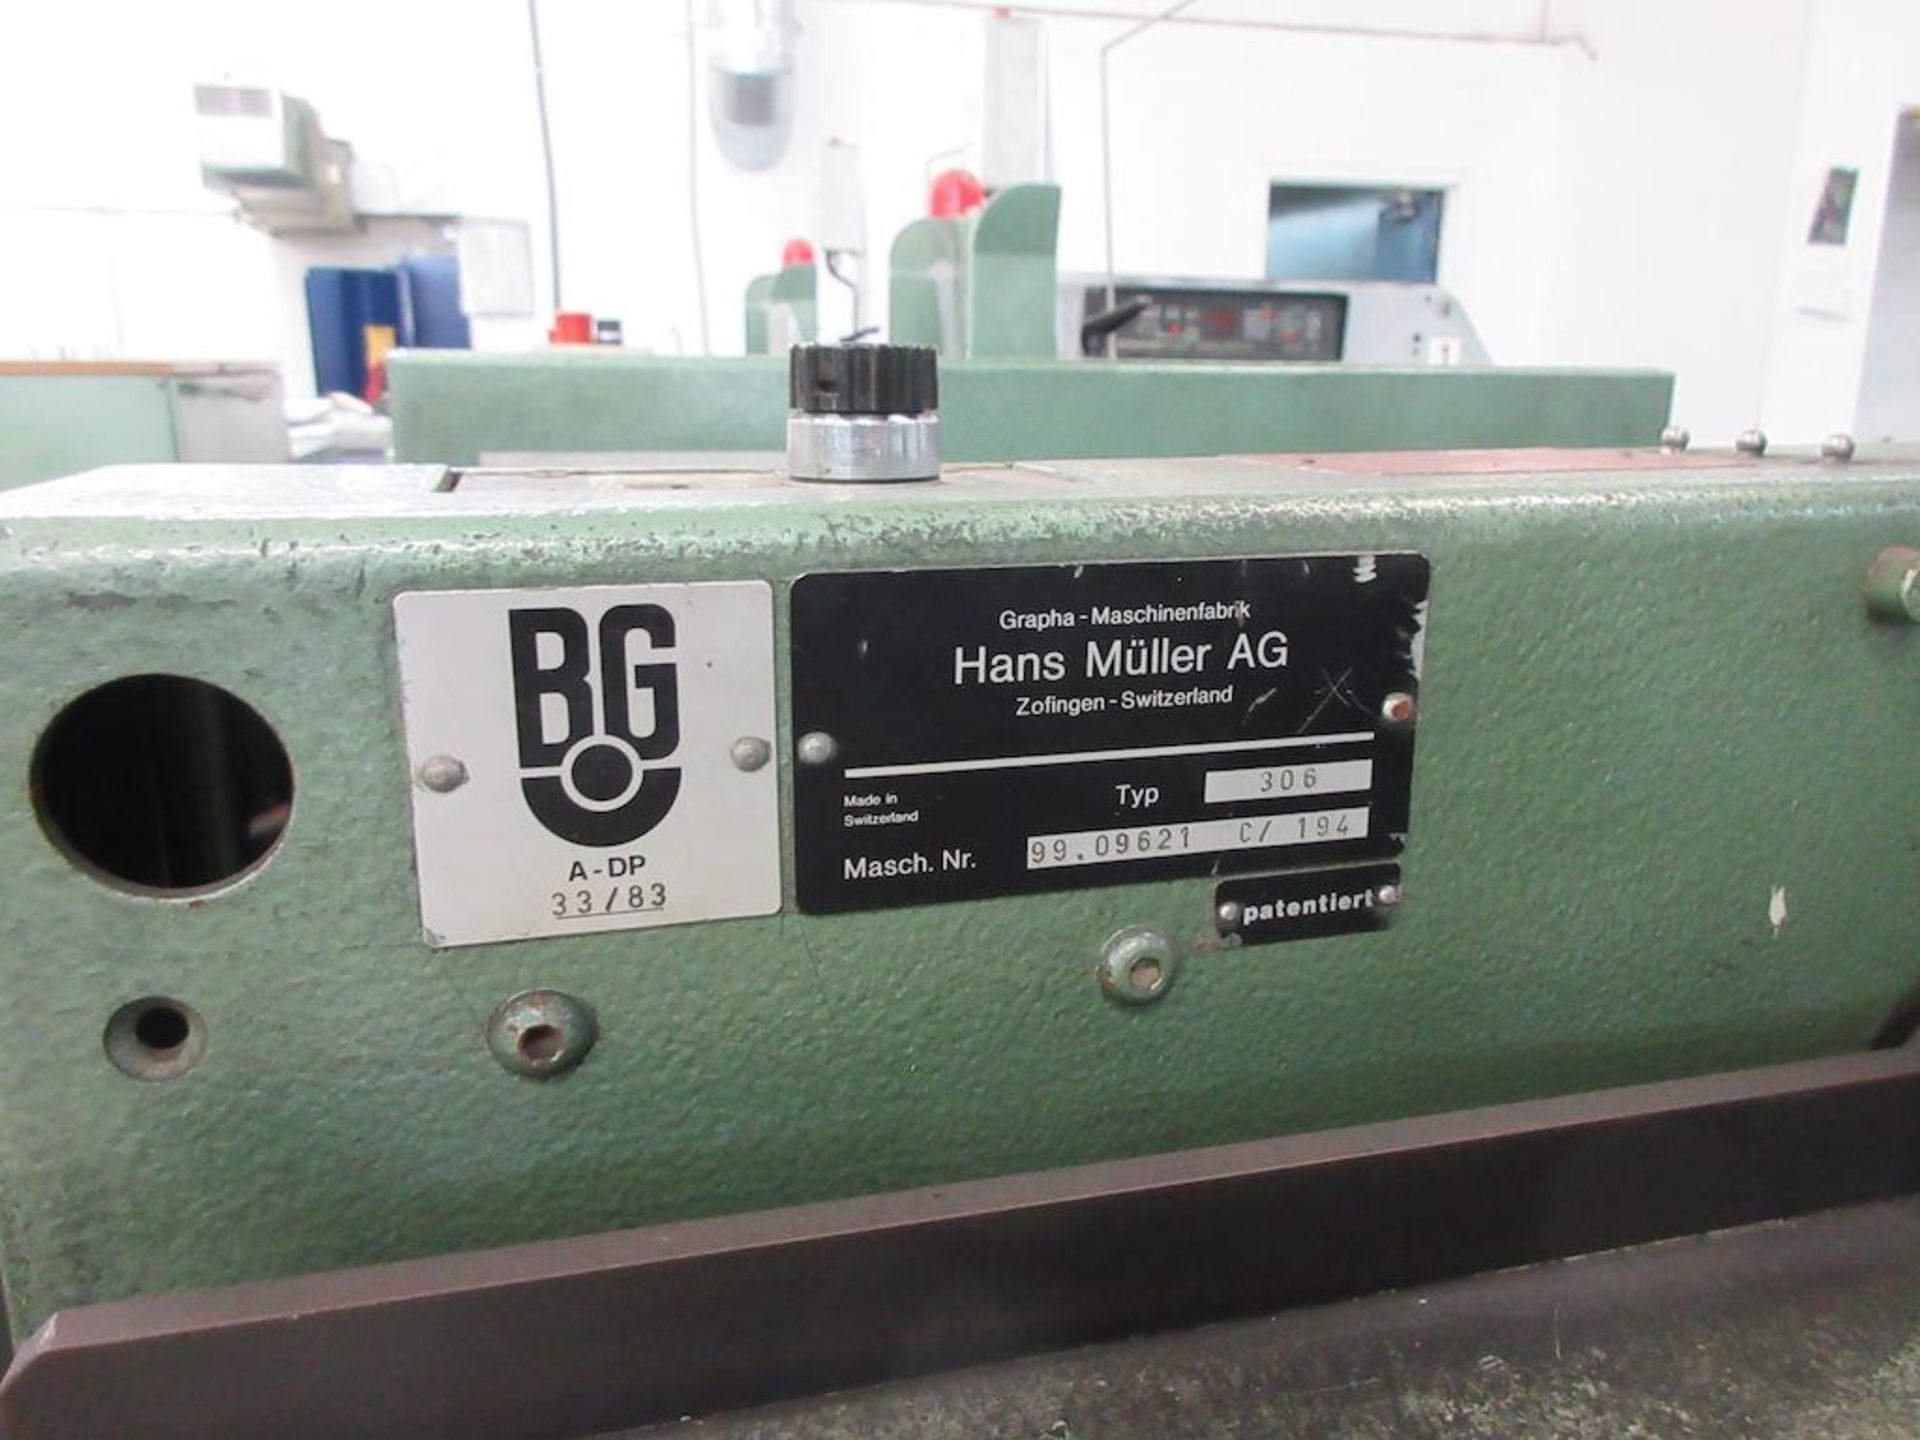 Muller 335 (6 Stations + Cover Feeder) includes Muller Stacker Muller 6 Stations: Type 306, sn 99.31 - Image 5 of 30